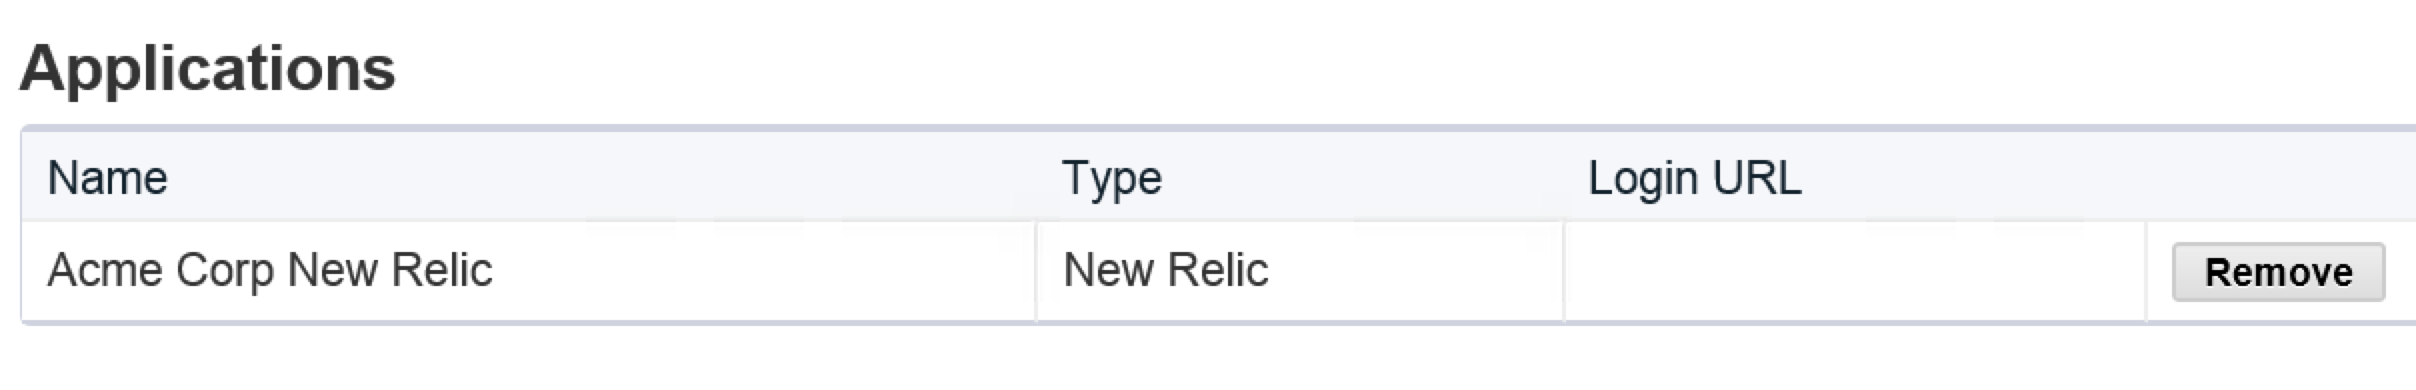 New Relic Application Added